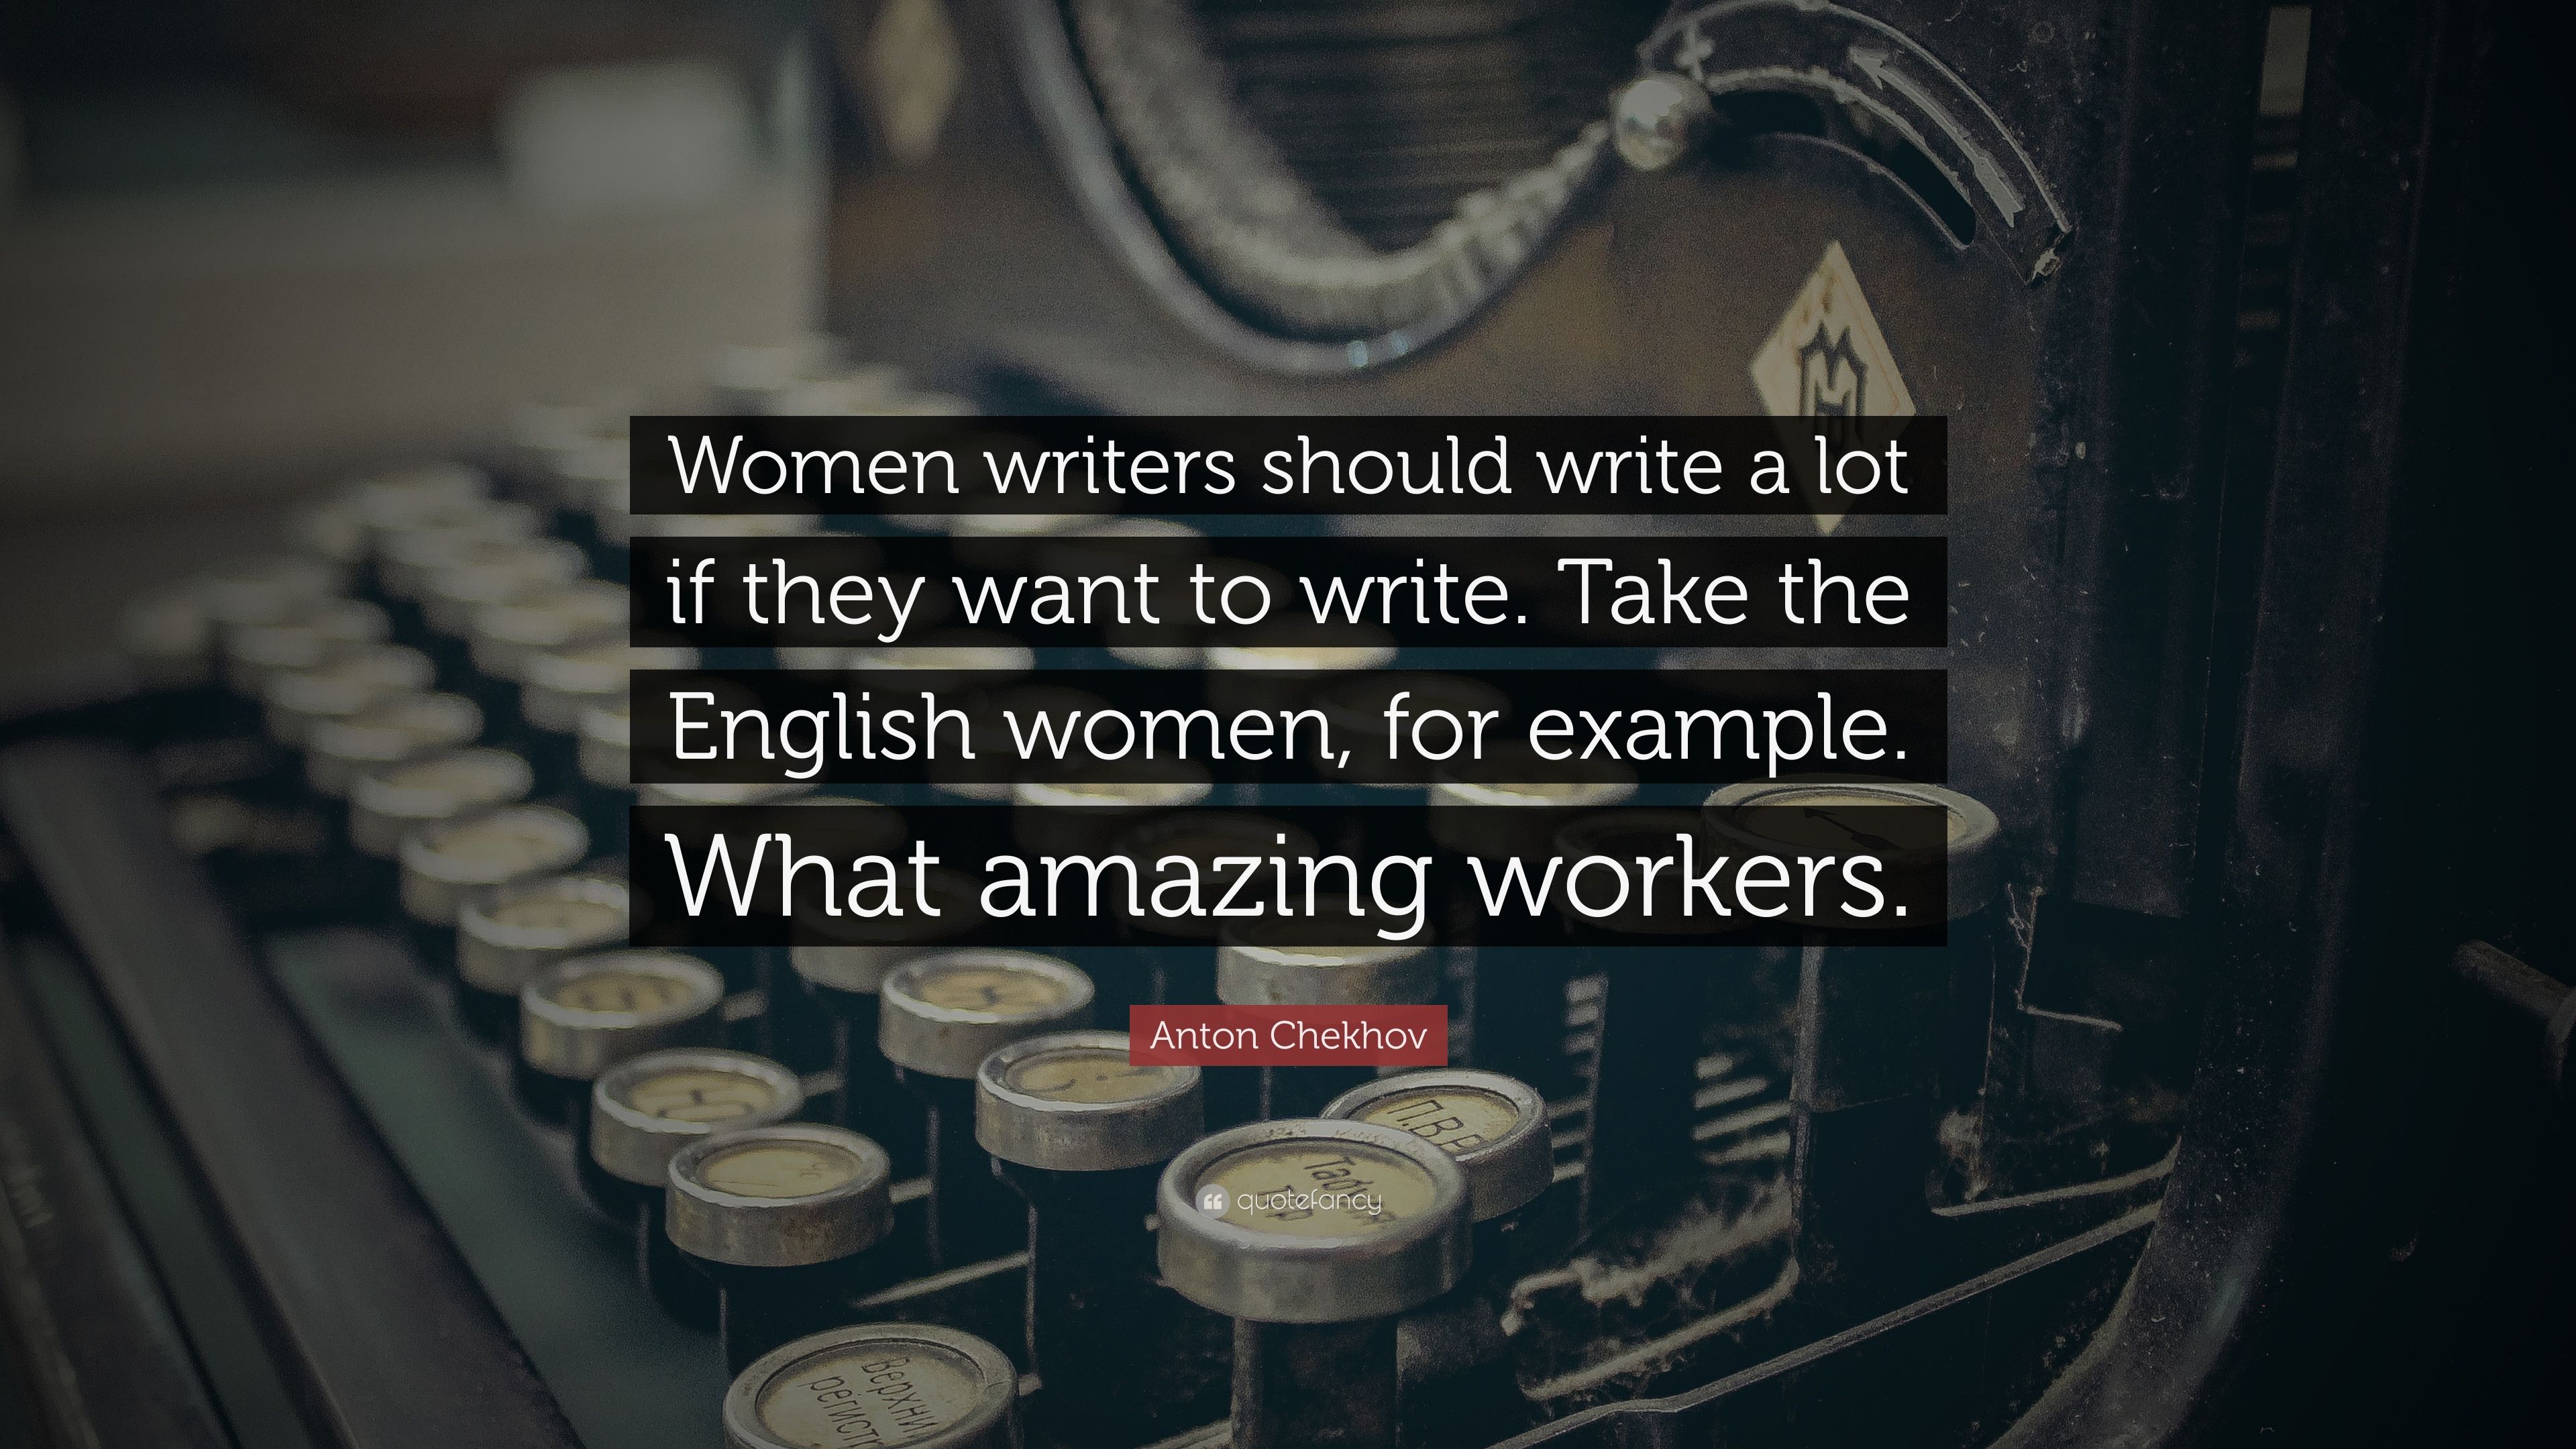 Anton Chekhov Quote: “Women writers should write a lot if they